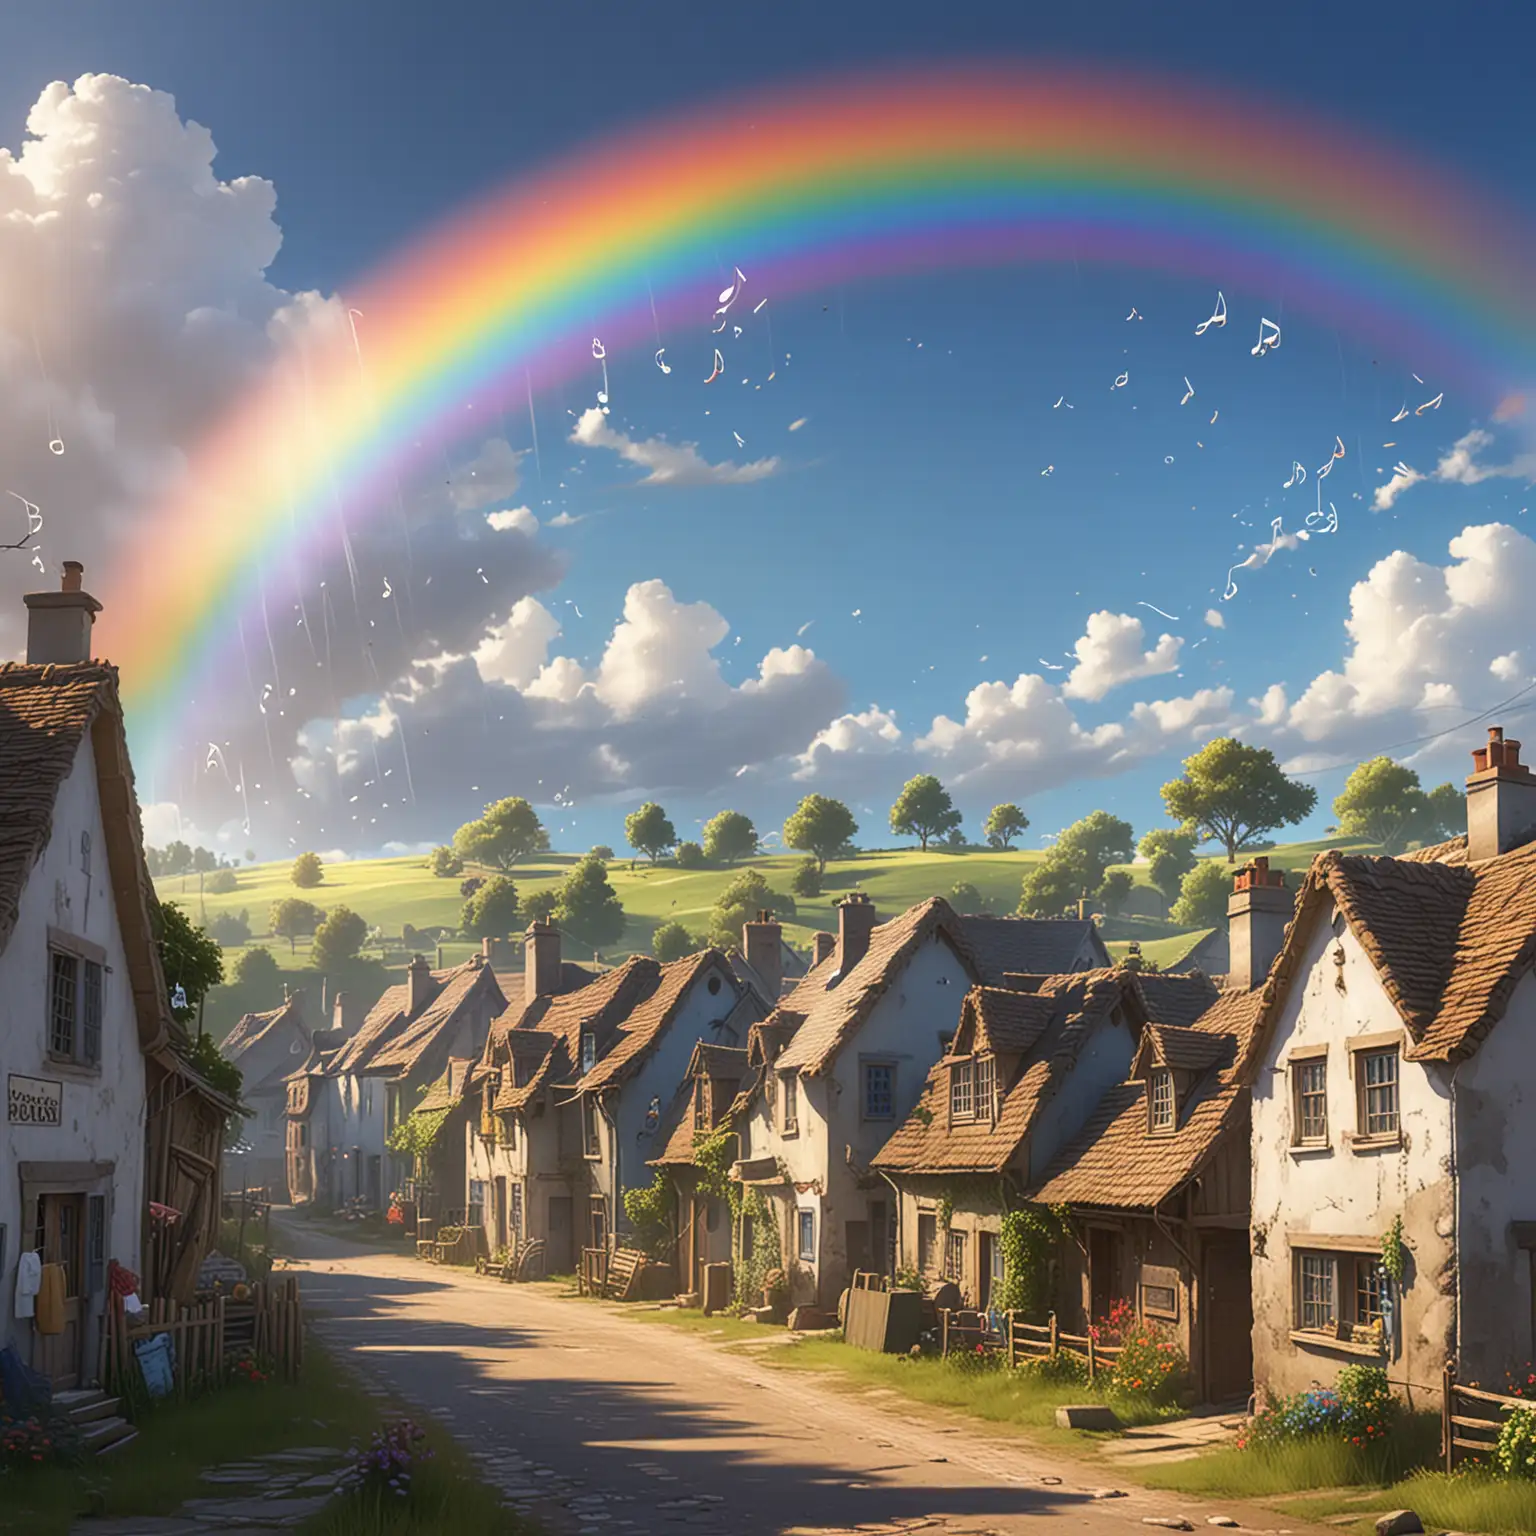 a large rainbow across a country village with a blue sky pixar style with large white musical notes floating across 
